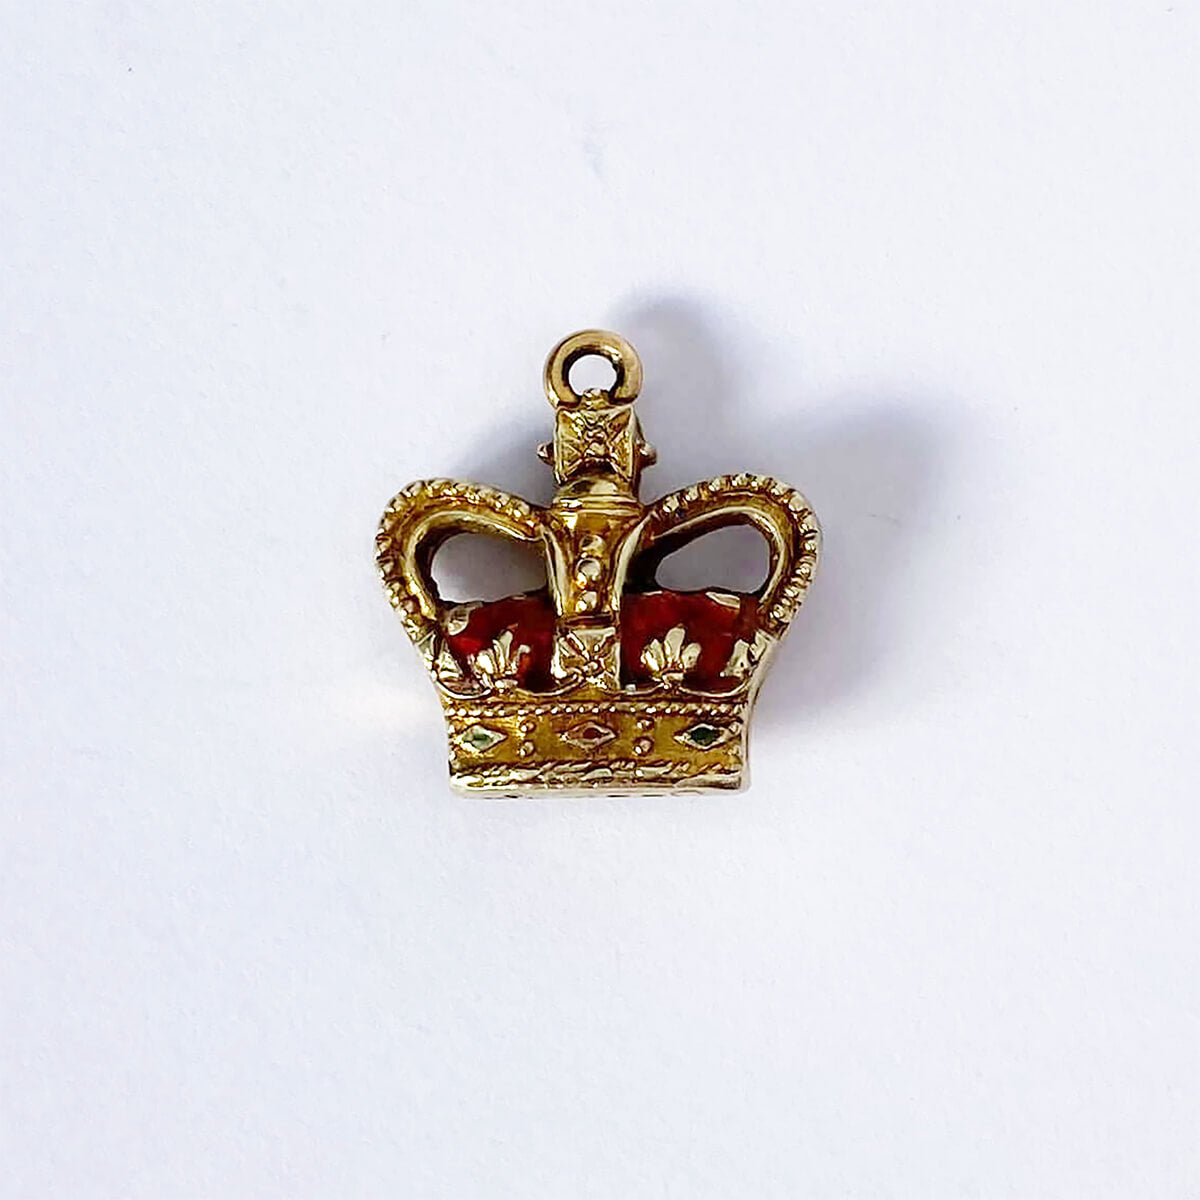 1952 made coronation crown charm in 9 carat gold with enamel